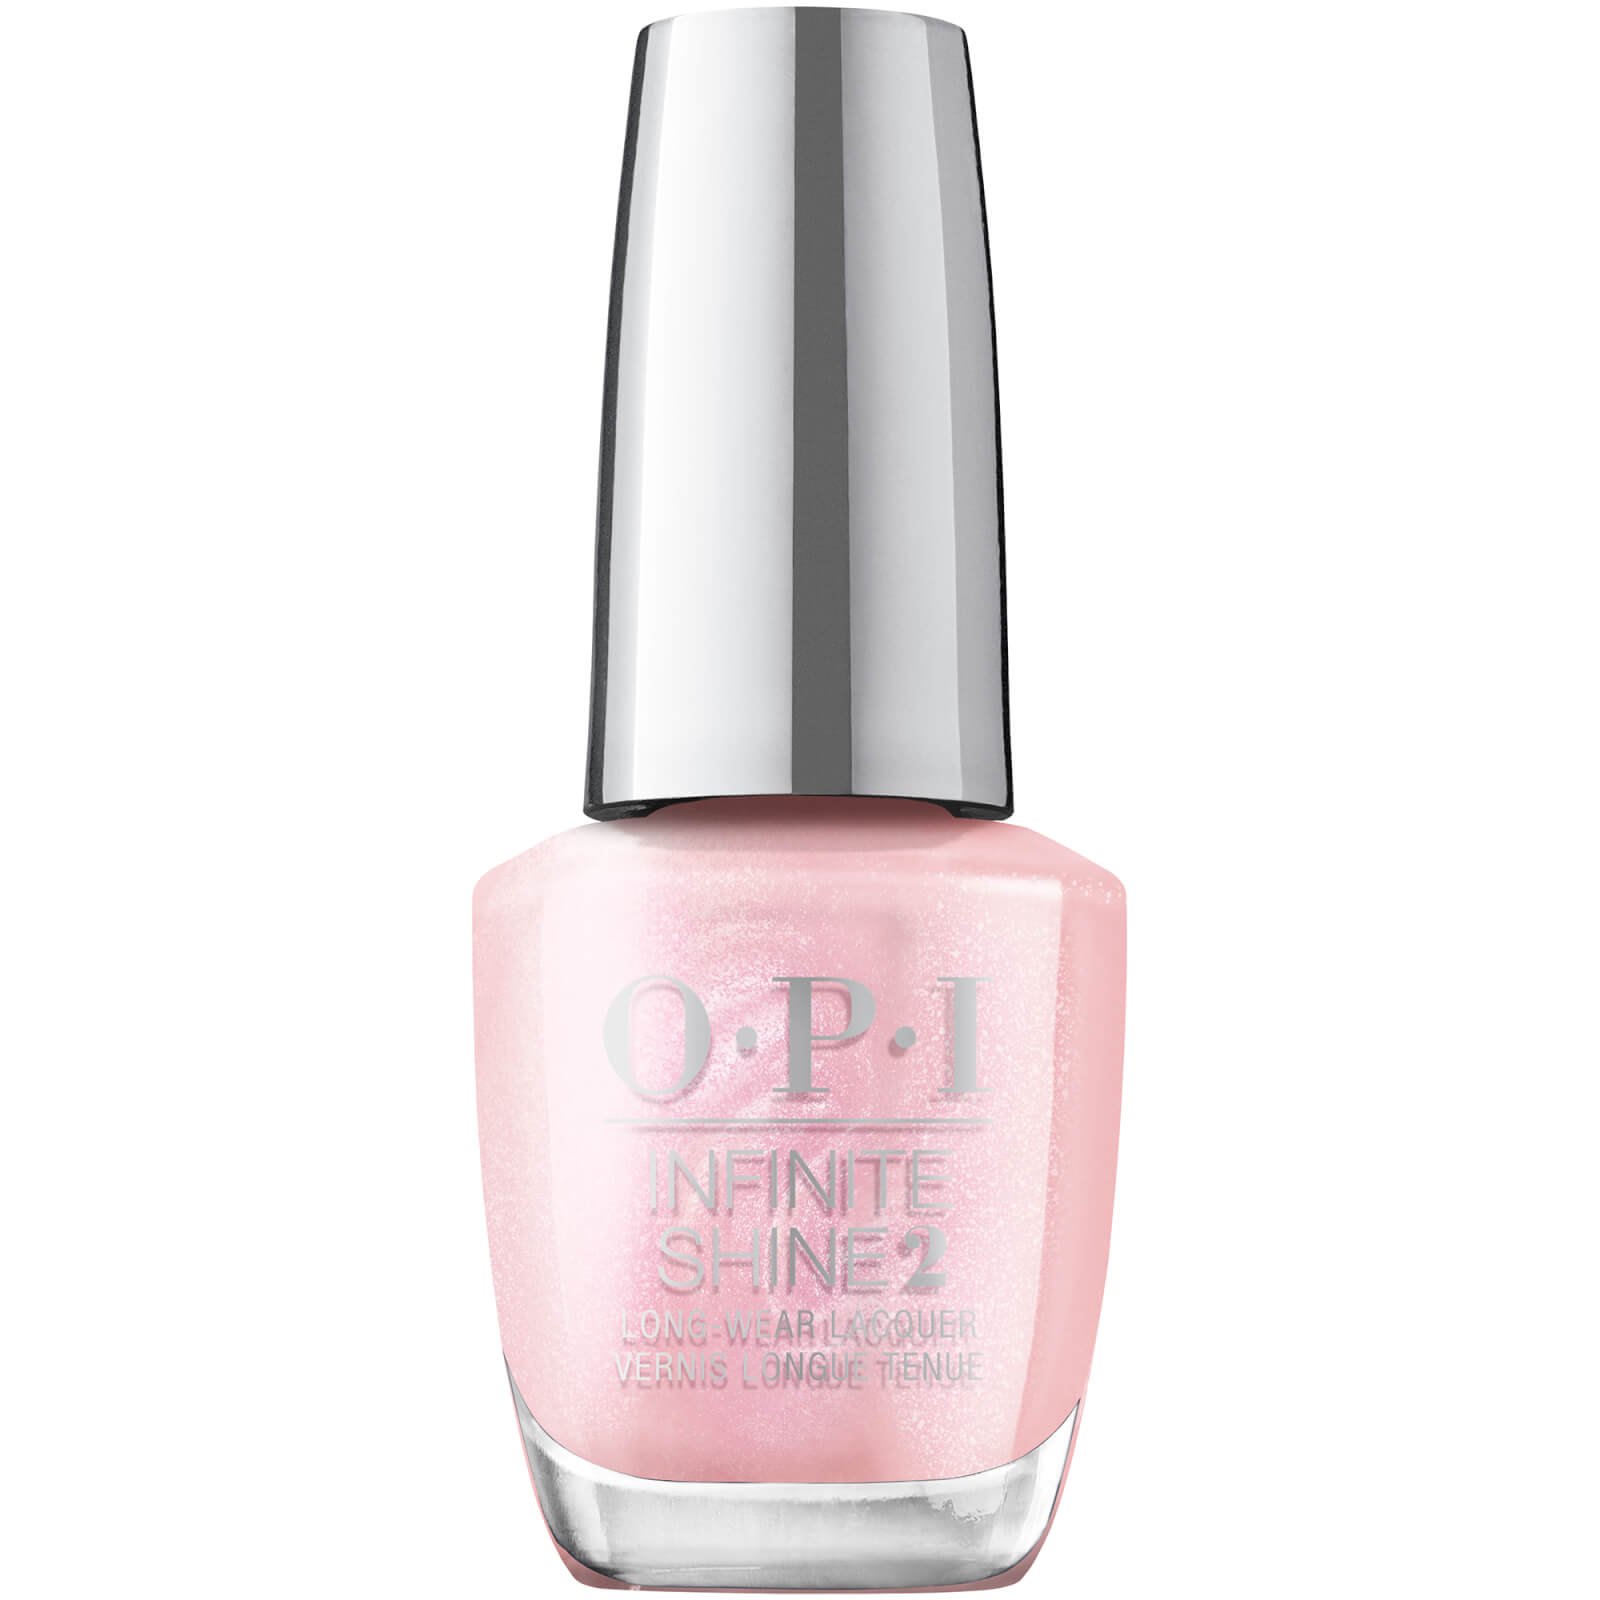 Opi Opi Collections Spring '23 Me, Myself, And Opi Infinite Shine 2 Long-wear Lacquer Isls007 I Meta My Soulmate